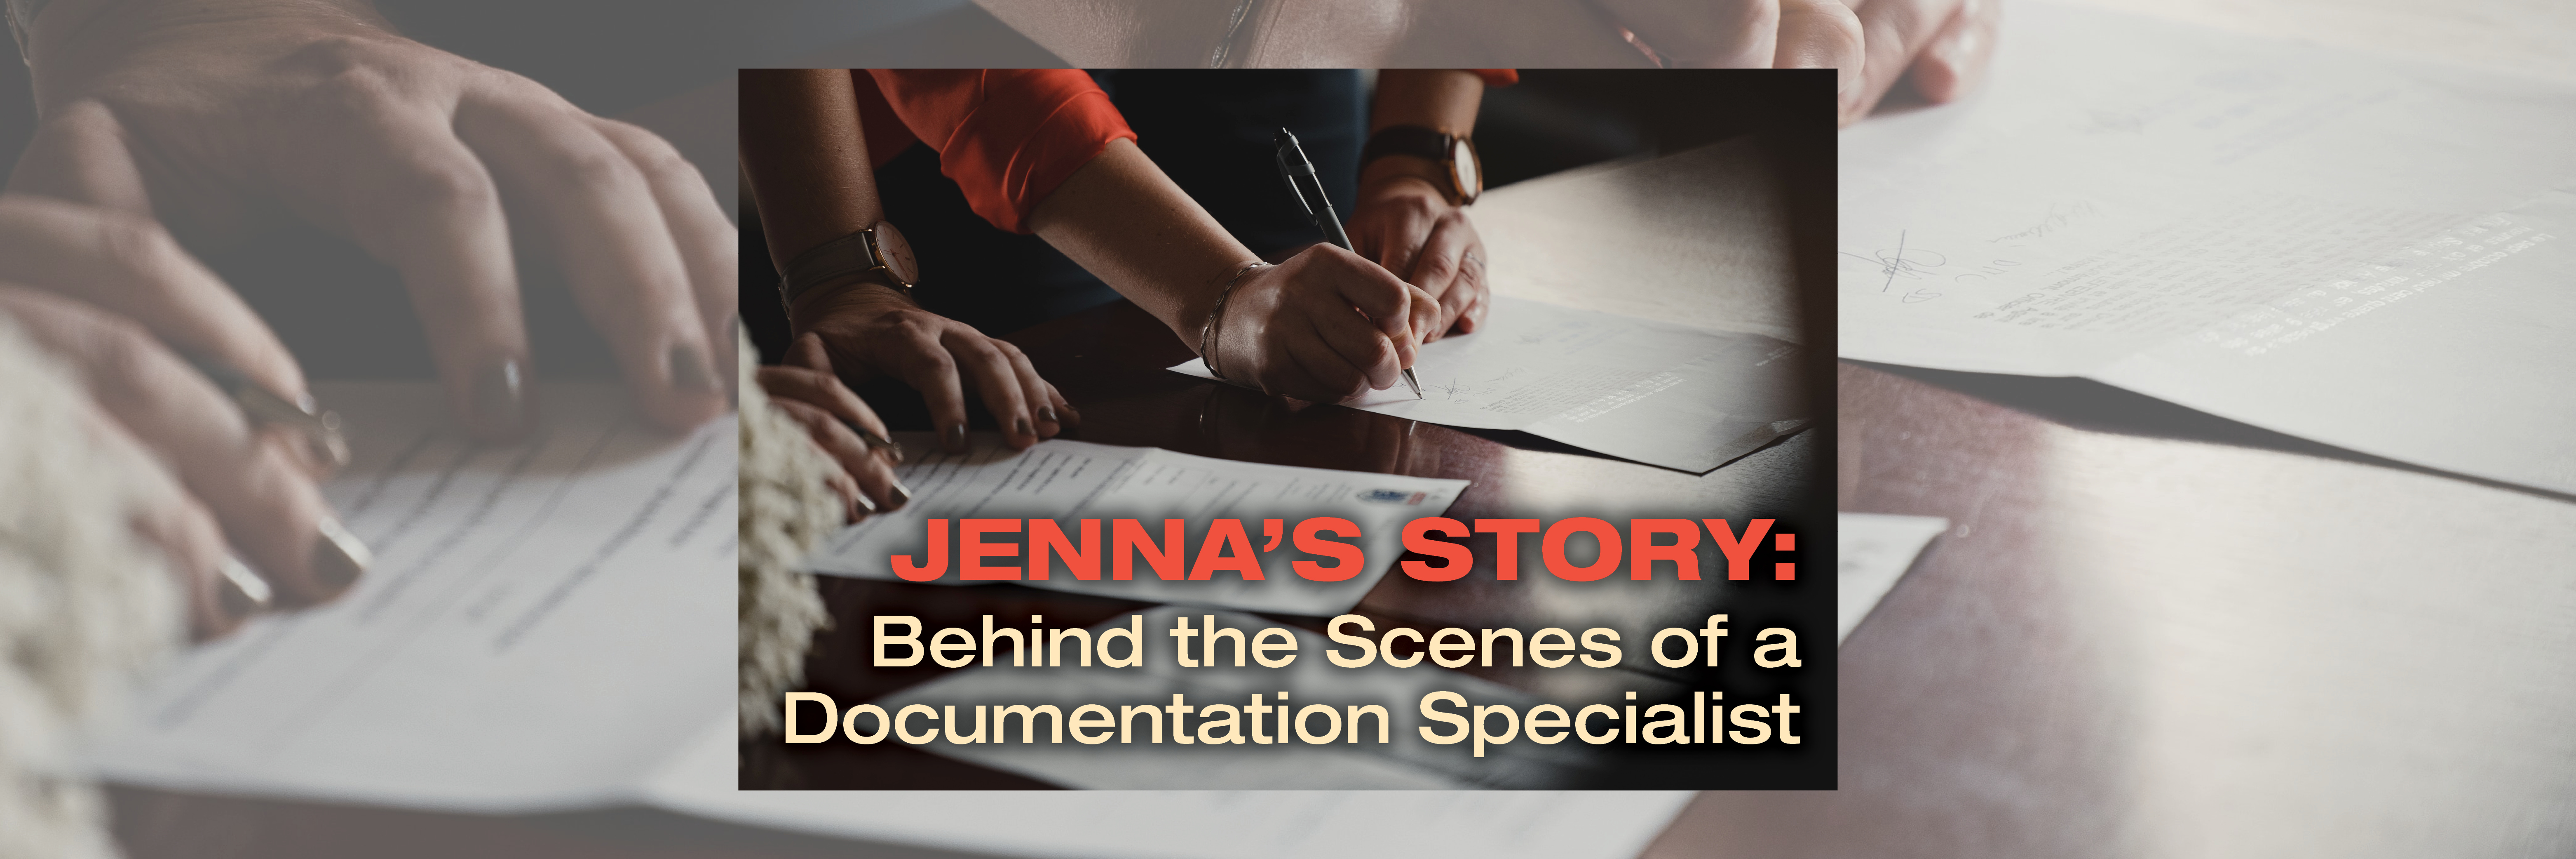 Jenna’s Story: Behind the Scenes of a Documentation Specialist